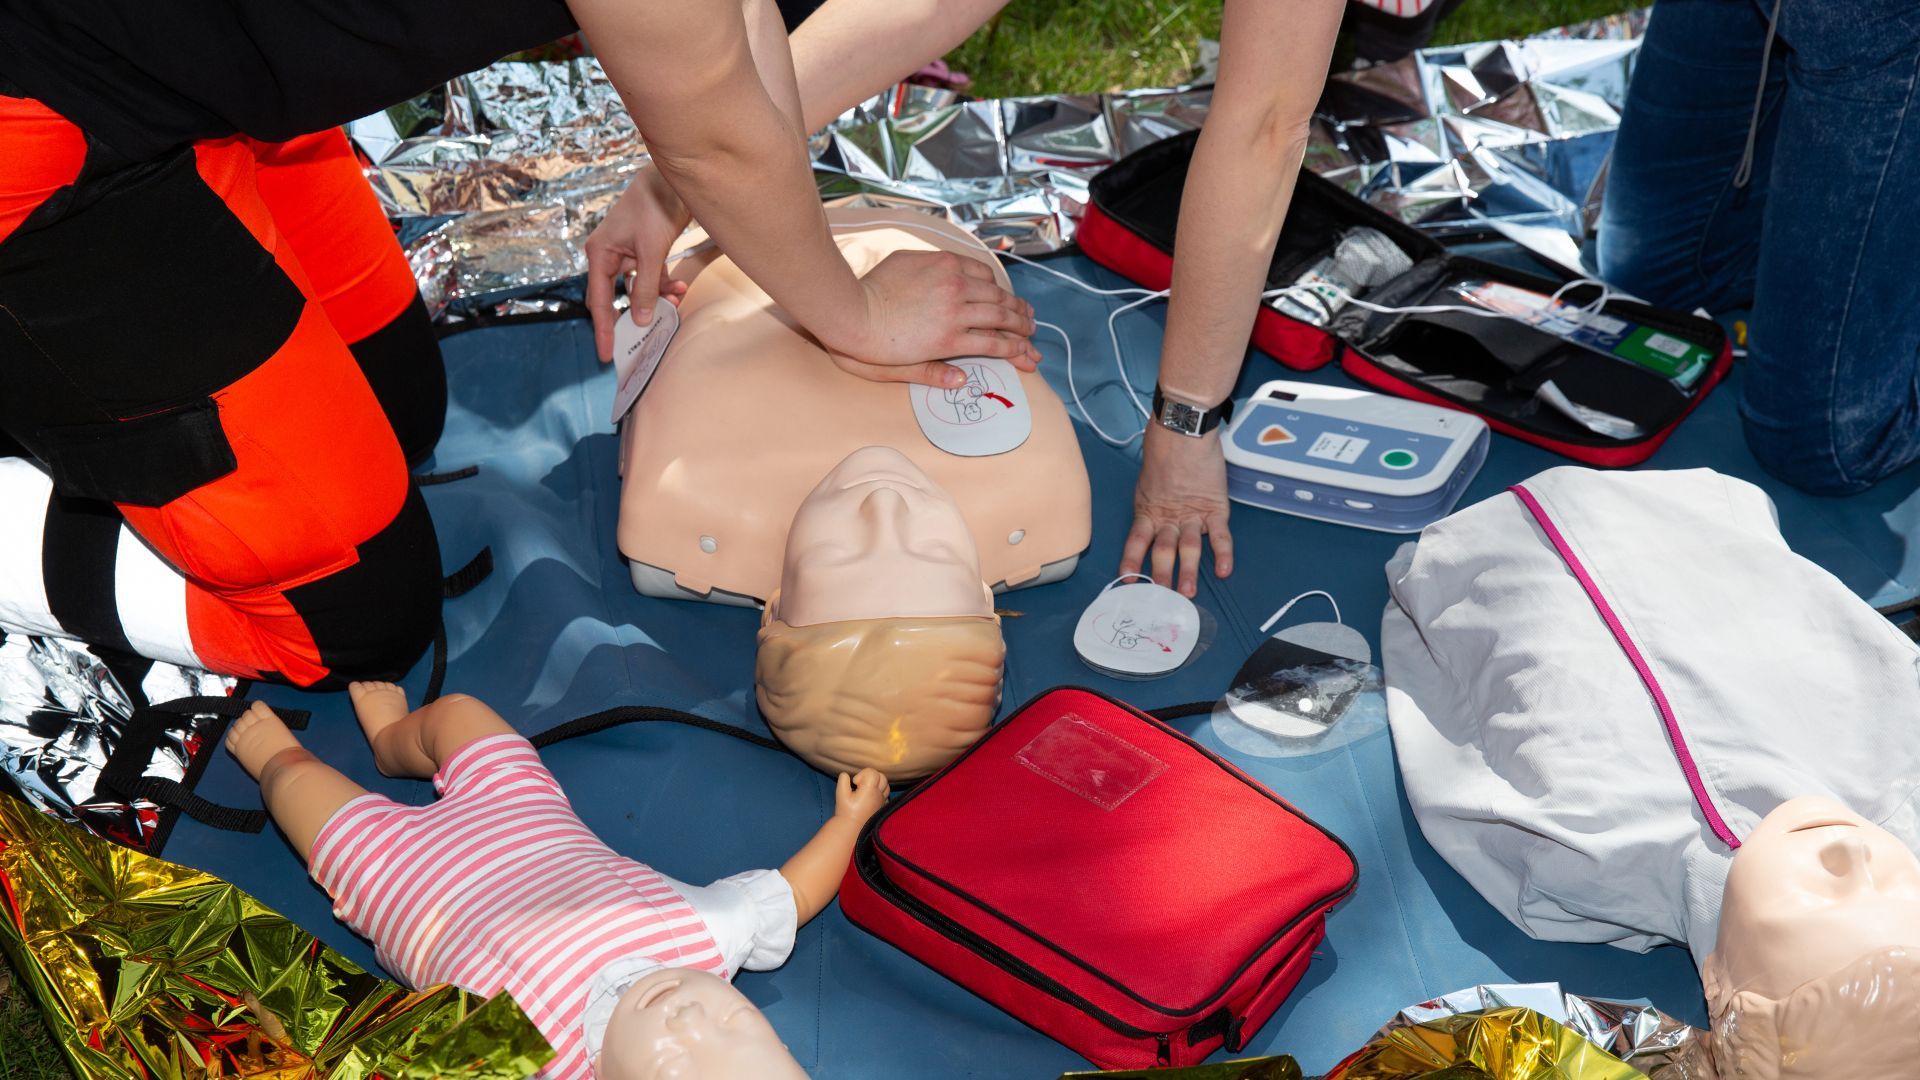 What To Look For In A CPR Certification Training Course